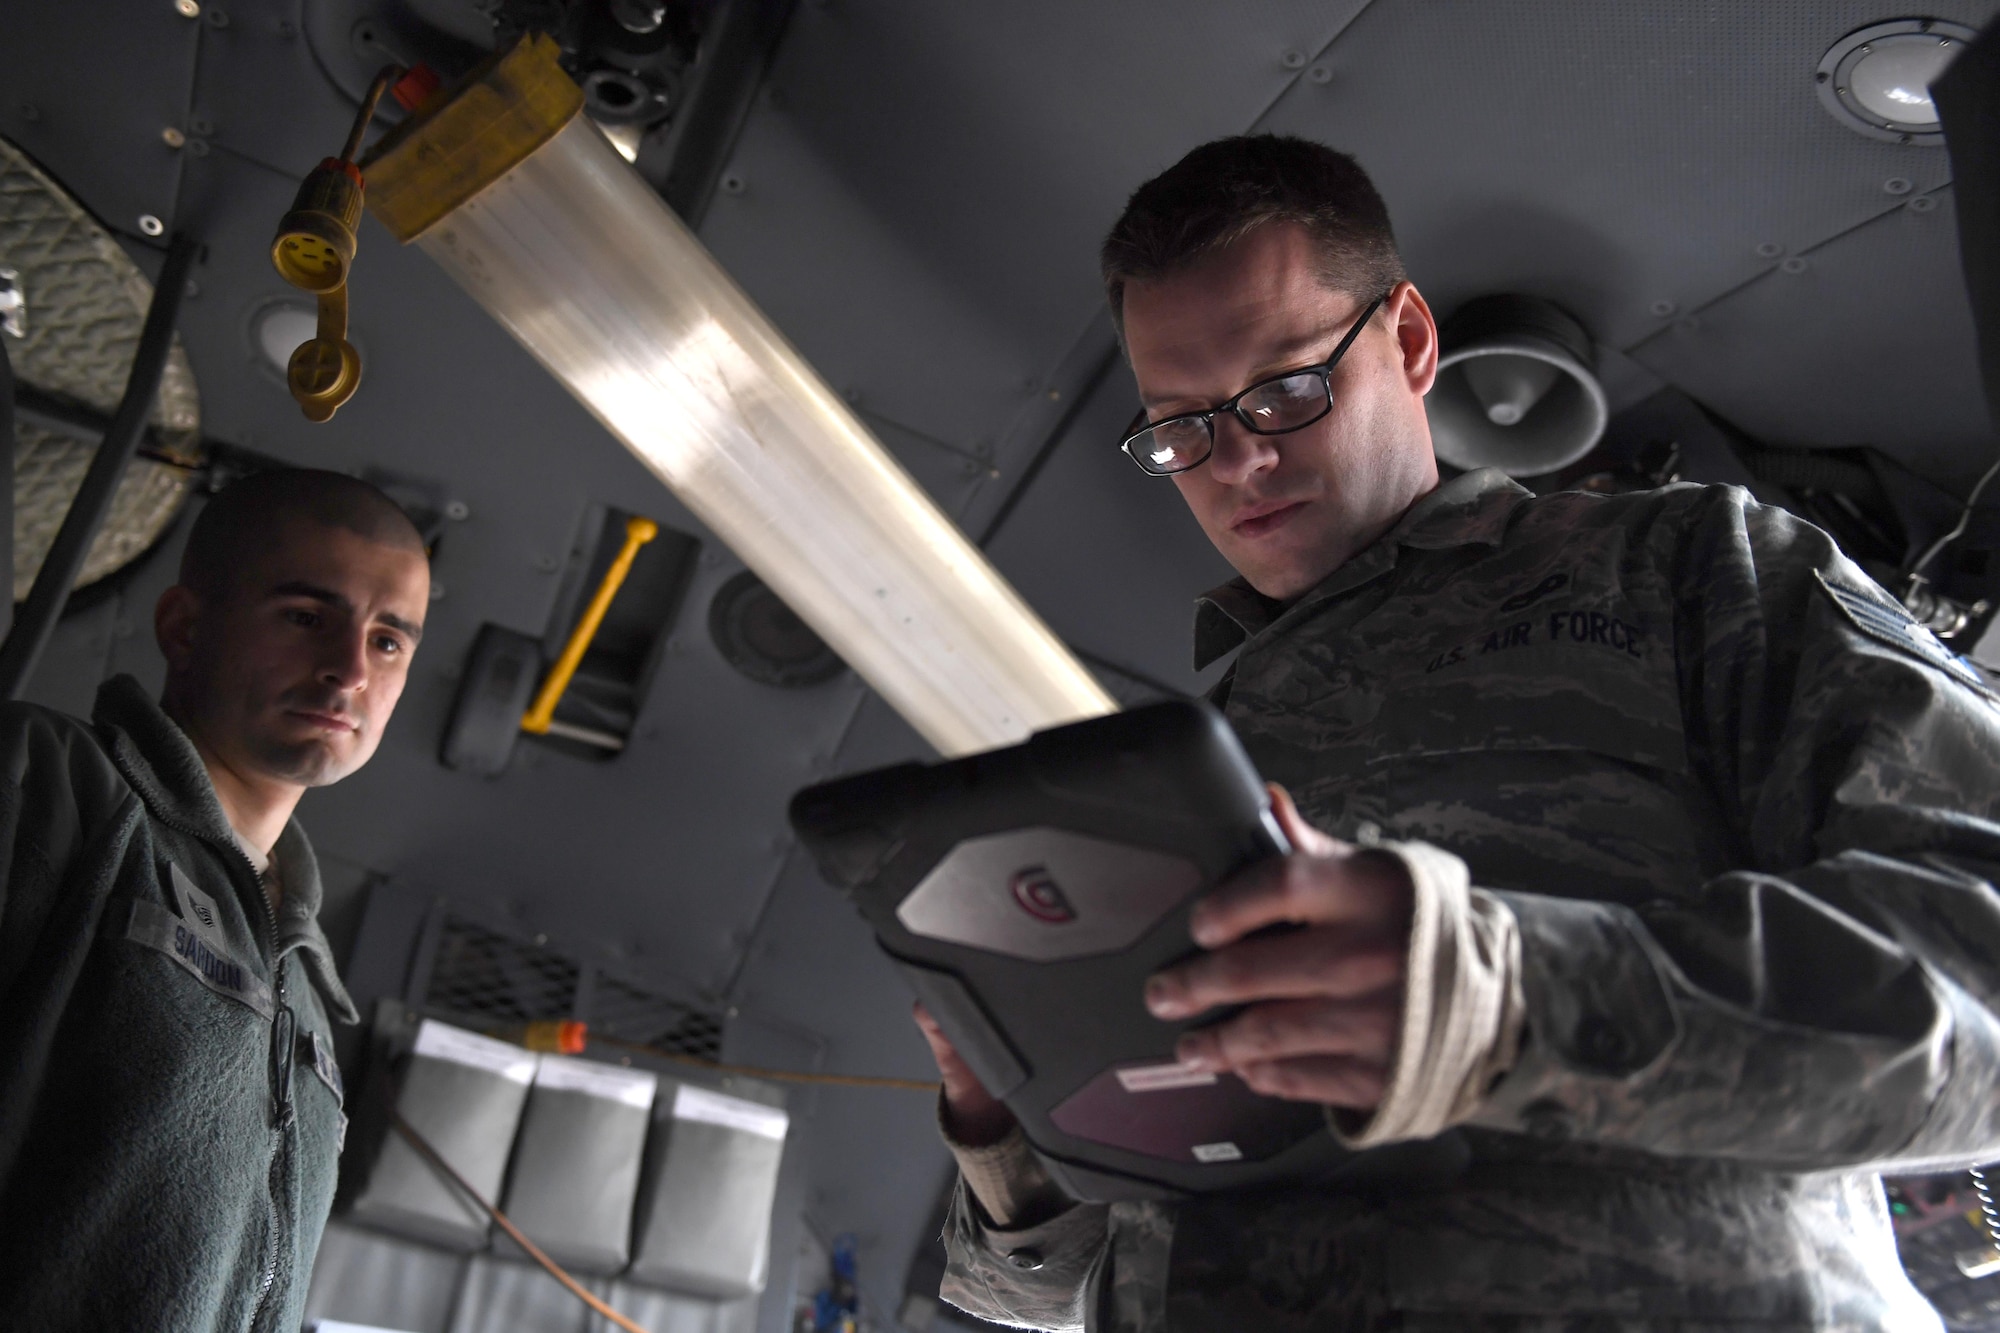 Tech. Sgt. Benjamin Sardon and Staff Sgt. Jacob Liebel, communication and navigation systems technicians with the 911th Aircraft Maintenance Squadron, perform a functional check on the Real Time In Cockpit modification at the Pittsburgh International Airport Air Reserve Station, Feb. 8, 2017. RTIC was installed in five of the eight C-130 Hercules aircraft assigned to the 911th Airlift Wing to improve situational awareness of pilots. (U.S. Air Force photo by Staff Sgt. Marjorie A. Bowlden)